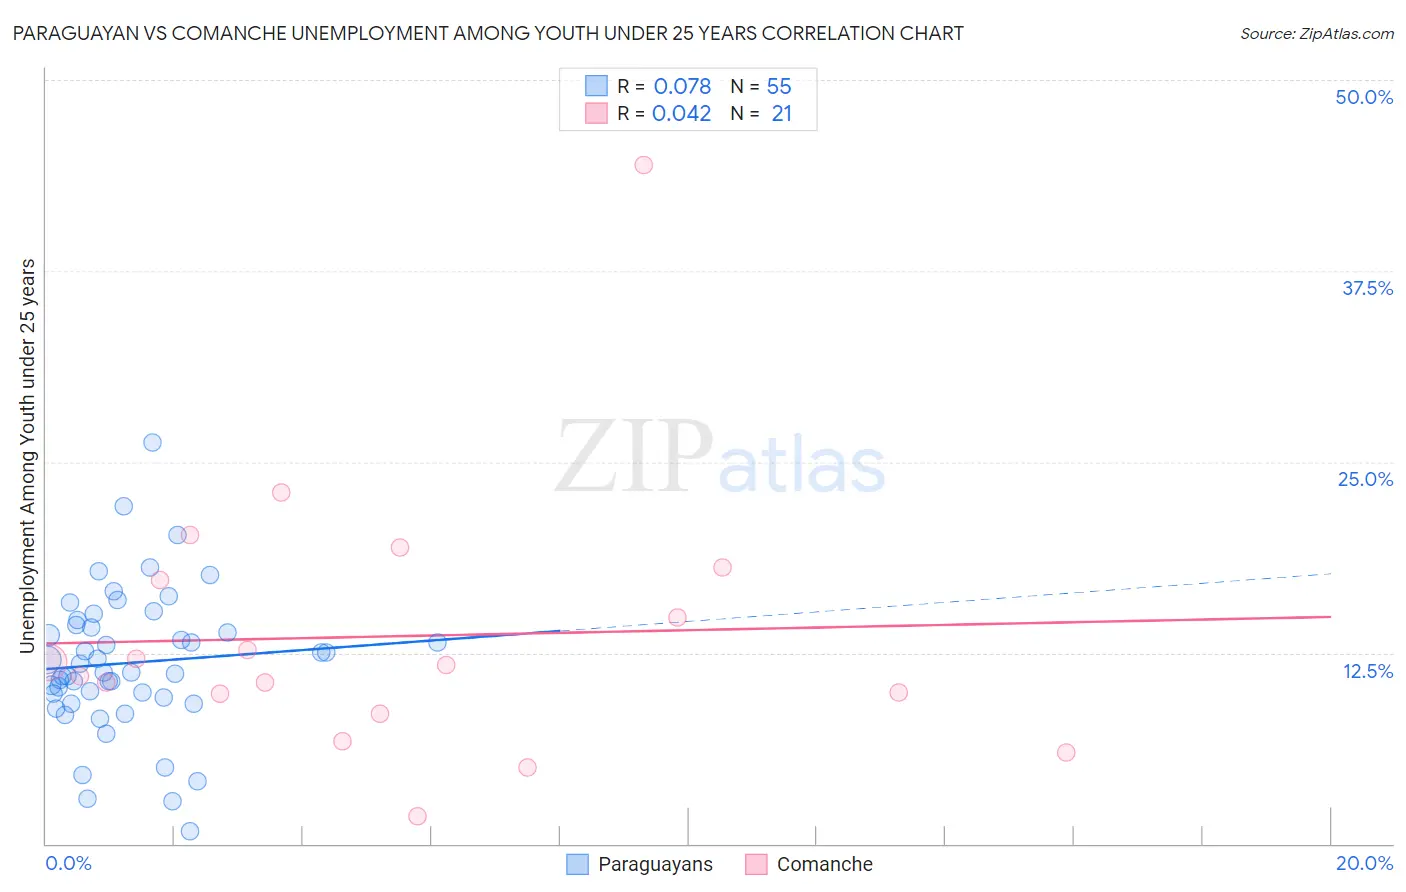 Paraguayan vs Comanche Unemployment Among Youth under 25 years